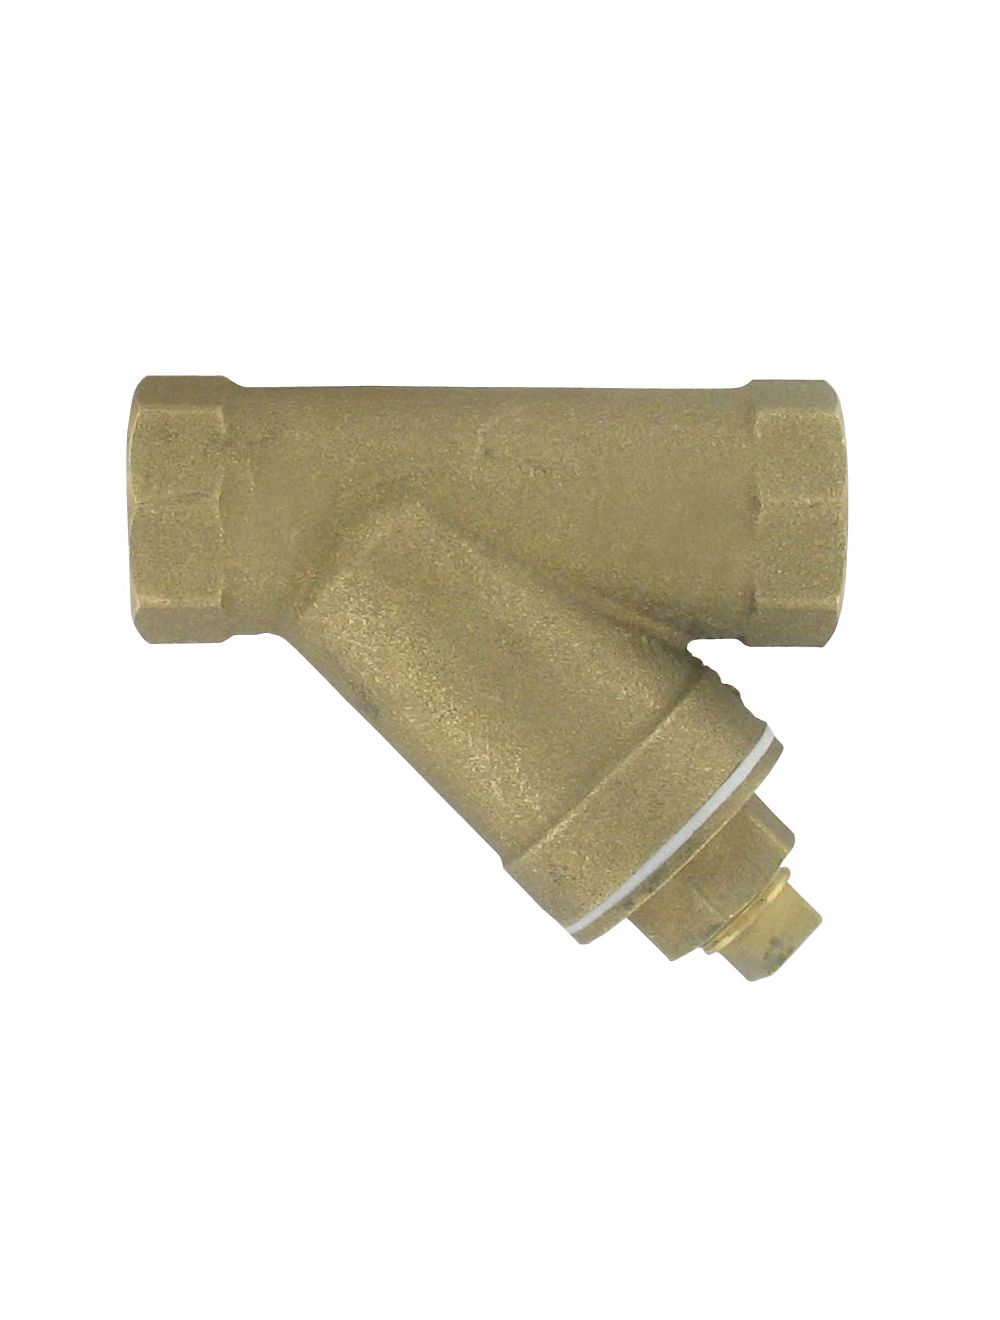 Series BYS  Brass Y-Strainer is a cost effective option for use in  industrial applications. Stainless steel strainer provides excellent  filtration to prevent damage to valves, meters, etc from rust and dirt